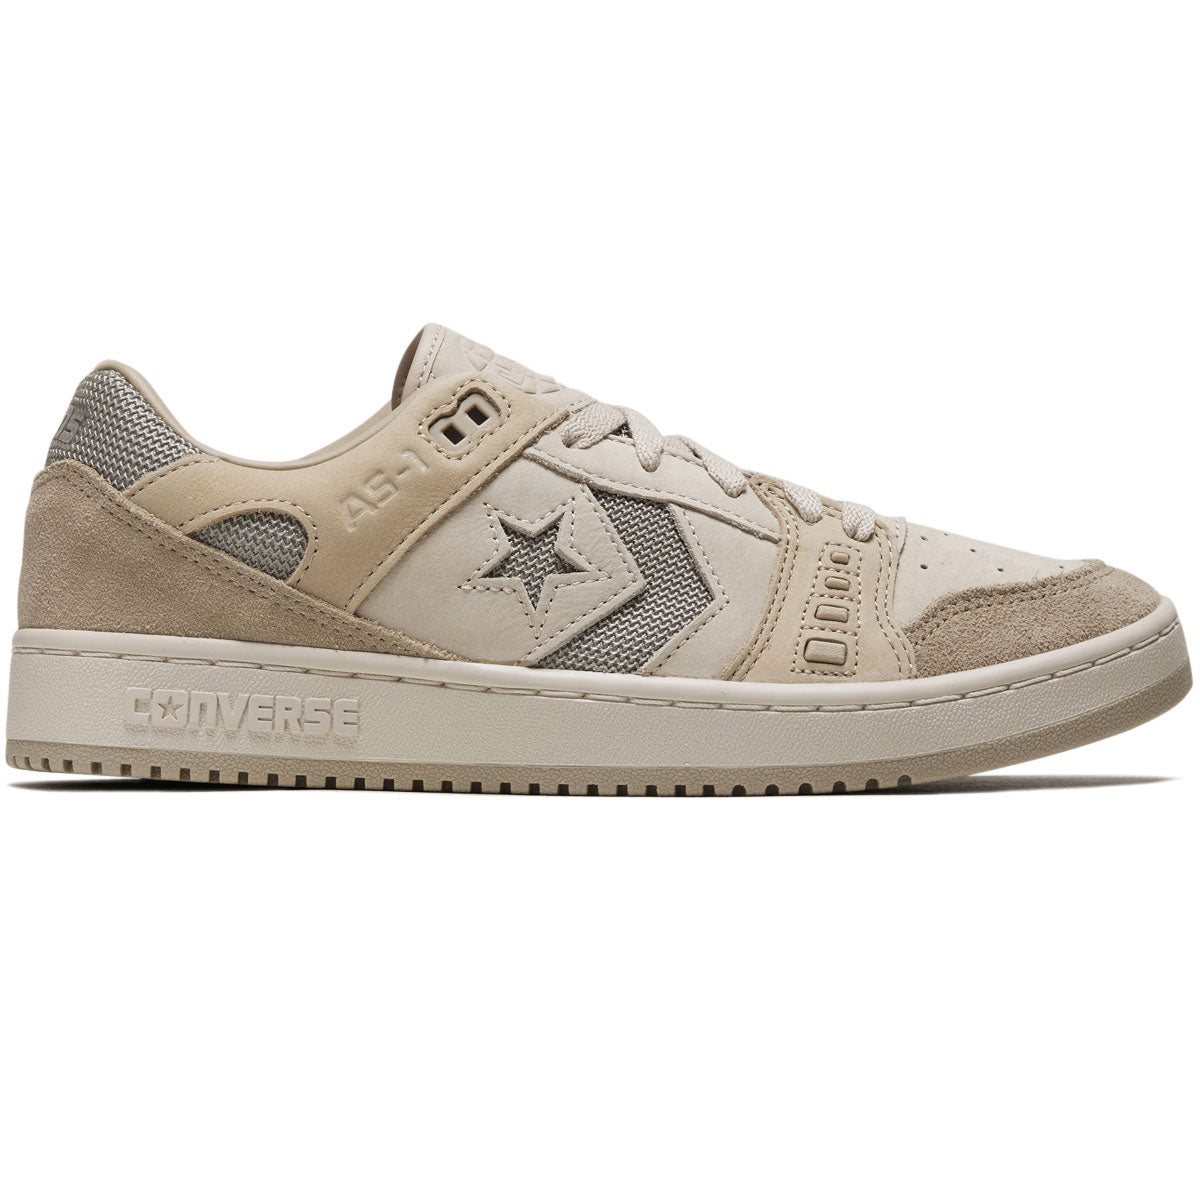 Converse AS-1 Pro Shoes - Shifting Sand/Warm Sand image 1